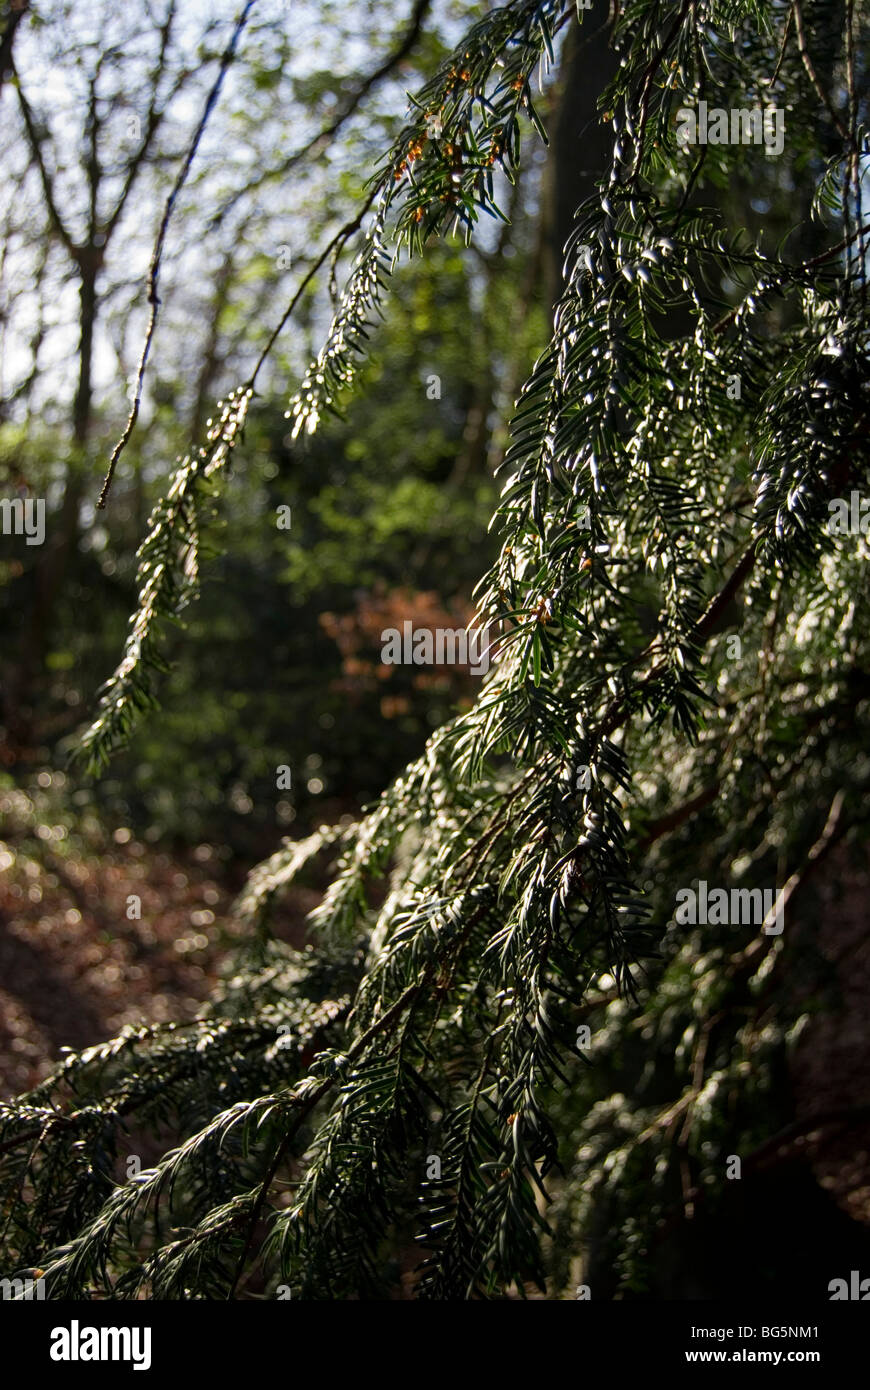 Yew leaves, Taxus baccata Stock Photo